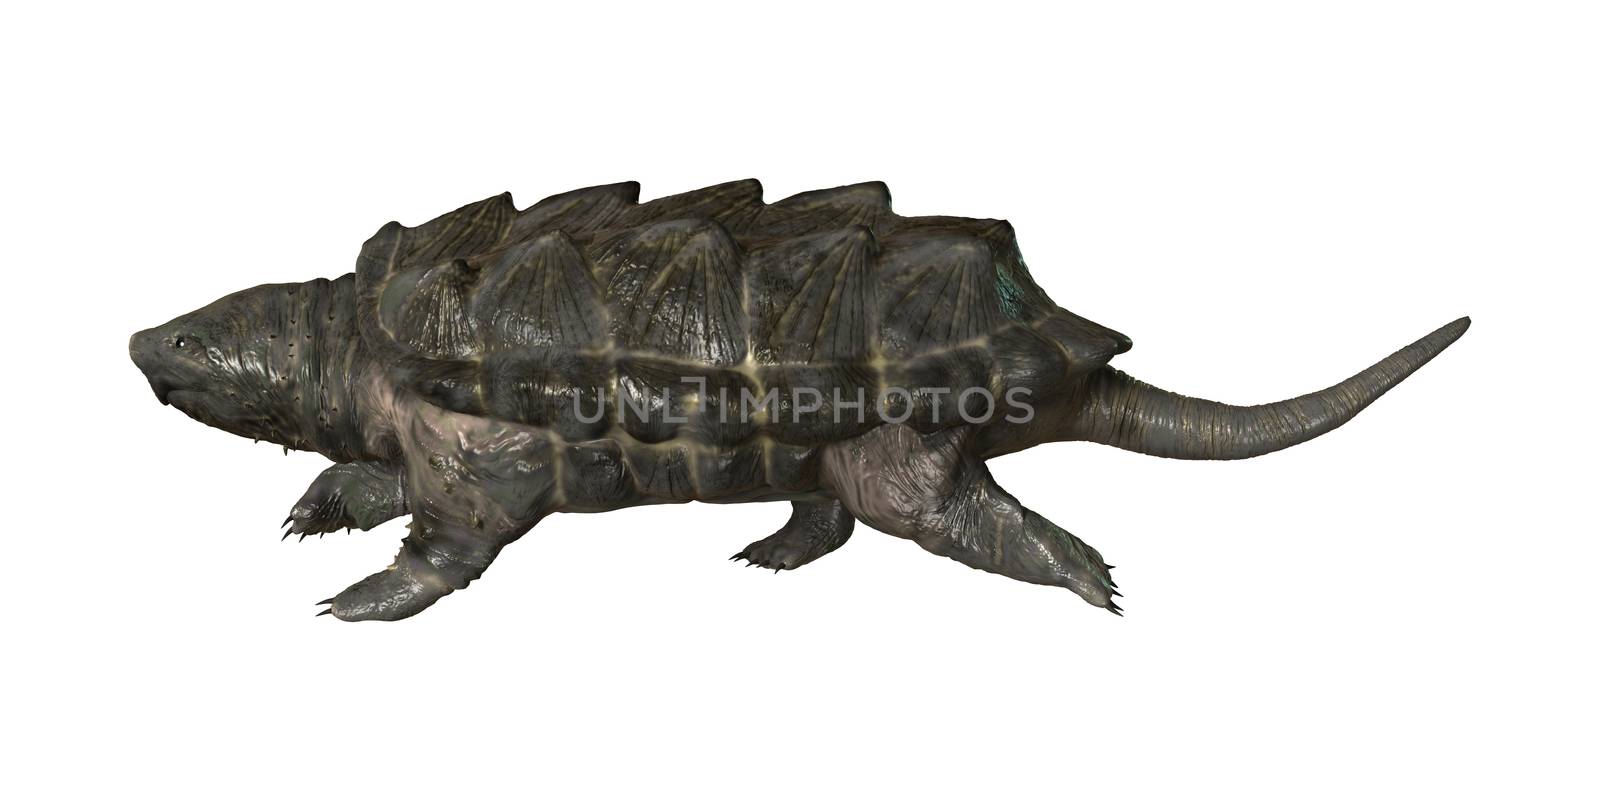 Alligator Snapping Turtle by Vac